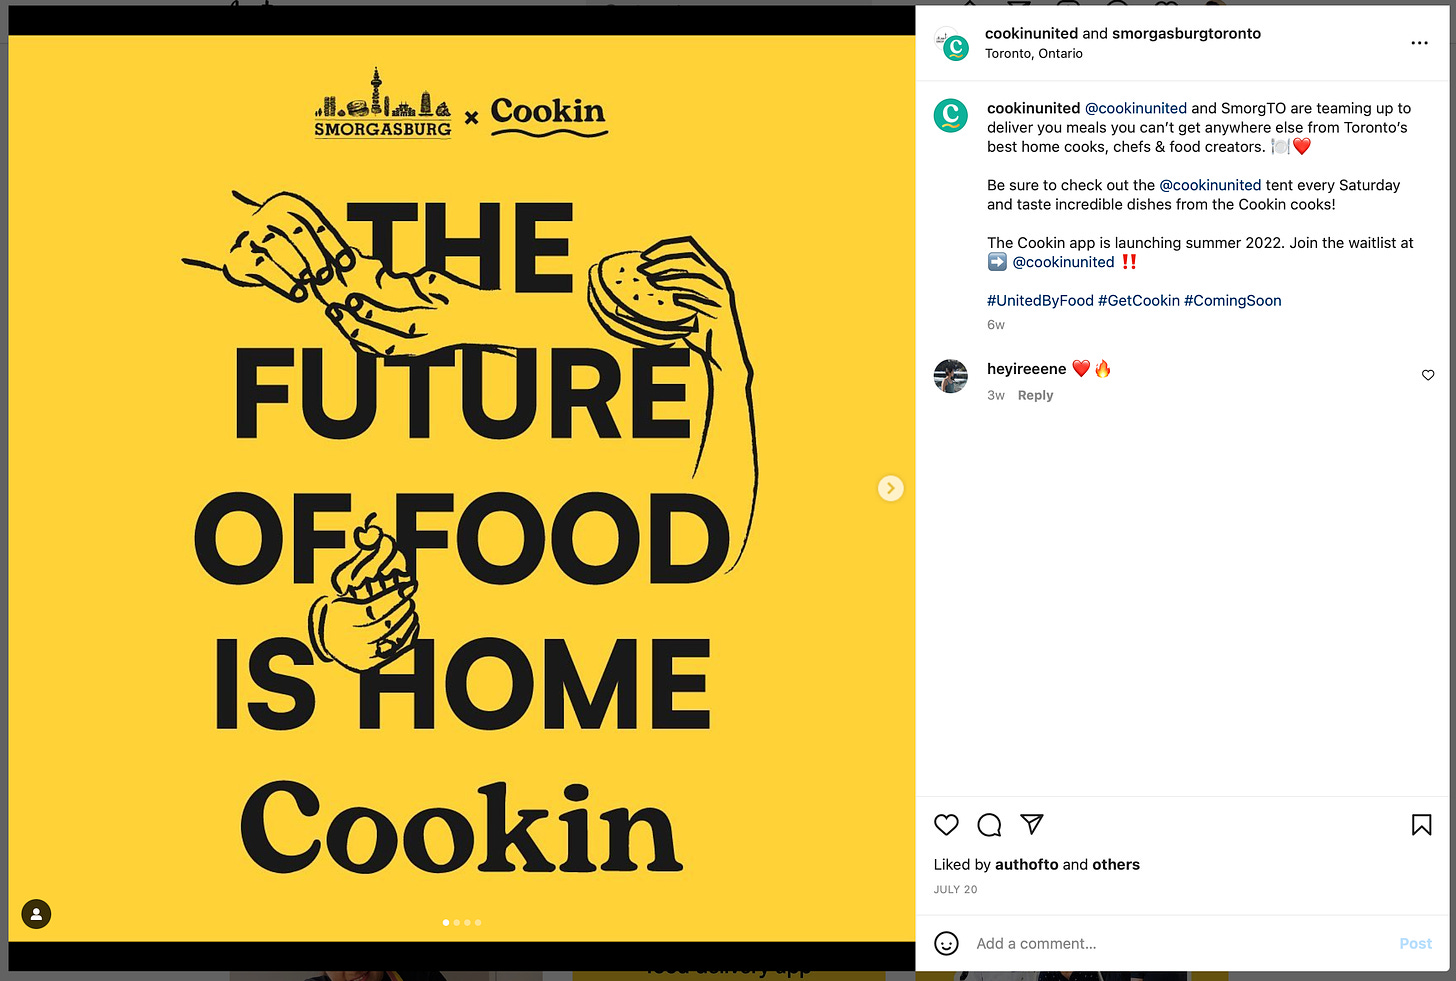 Screenshot of an Instagram post by Cookin, with the slogan, "The Future of Food is Home Cookin"